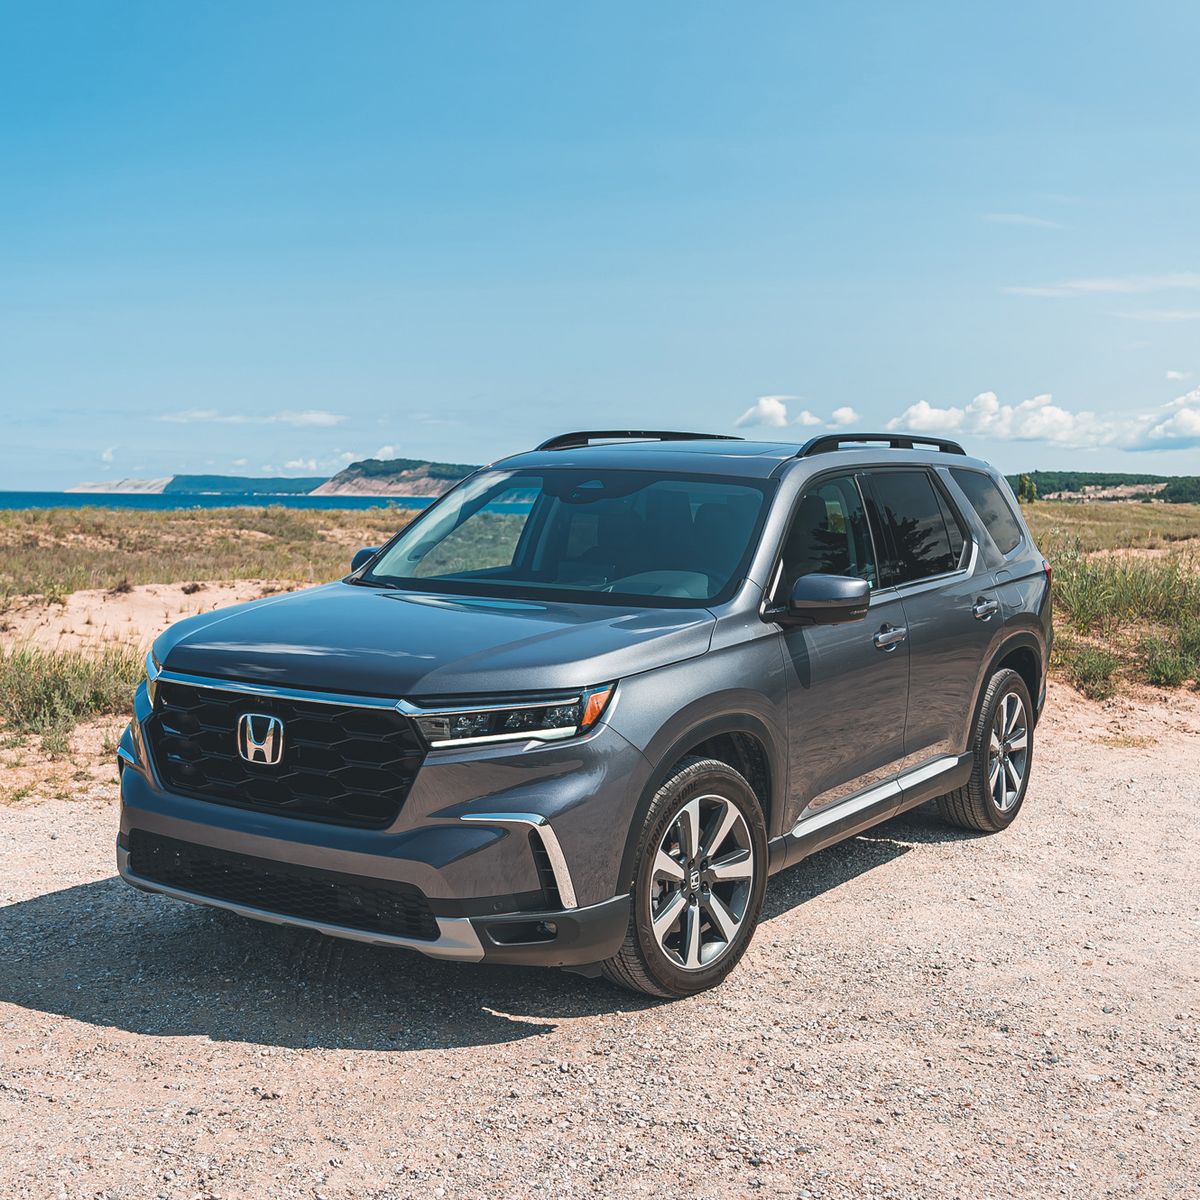 2023 Honda Pilot Elite Tested: Birds of a Feather Fly Together